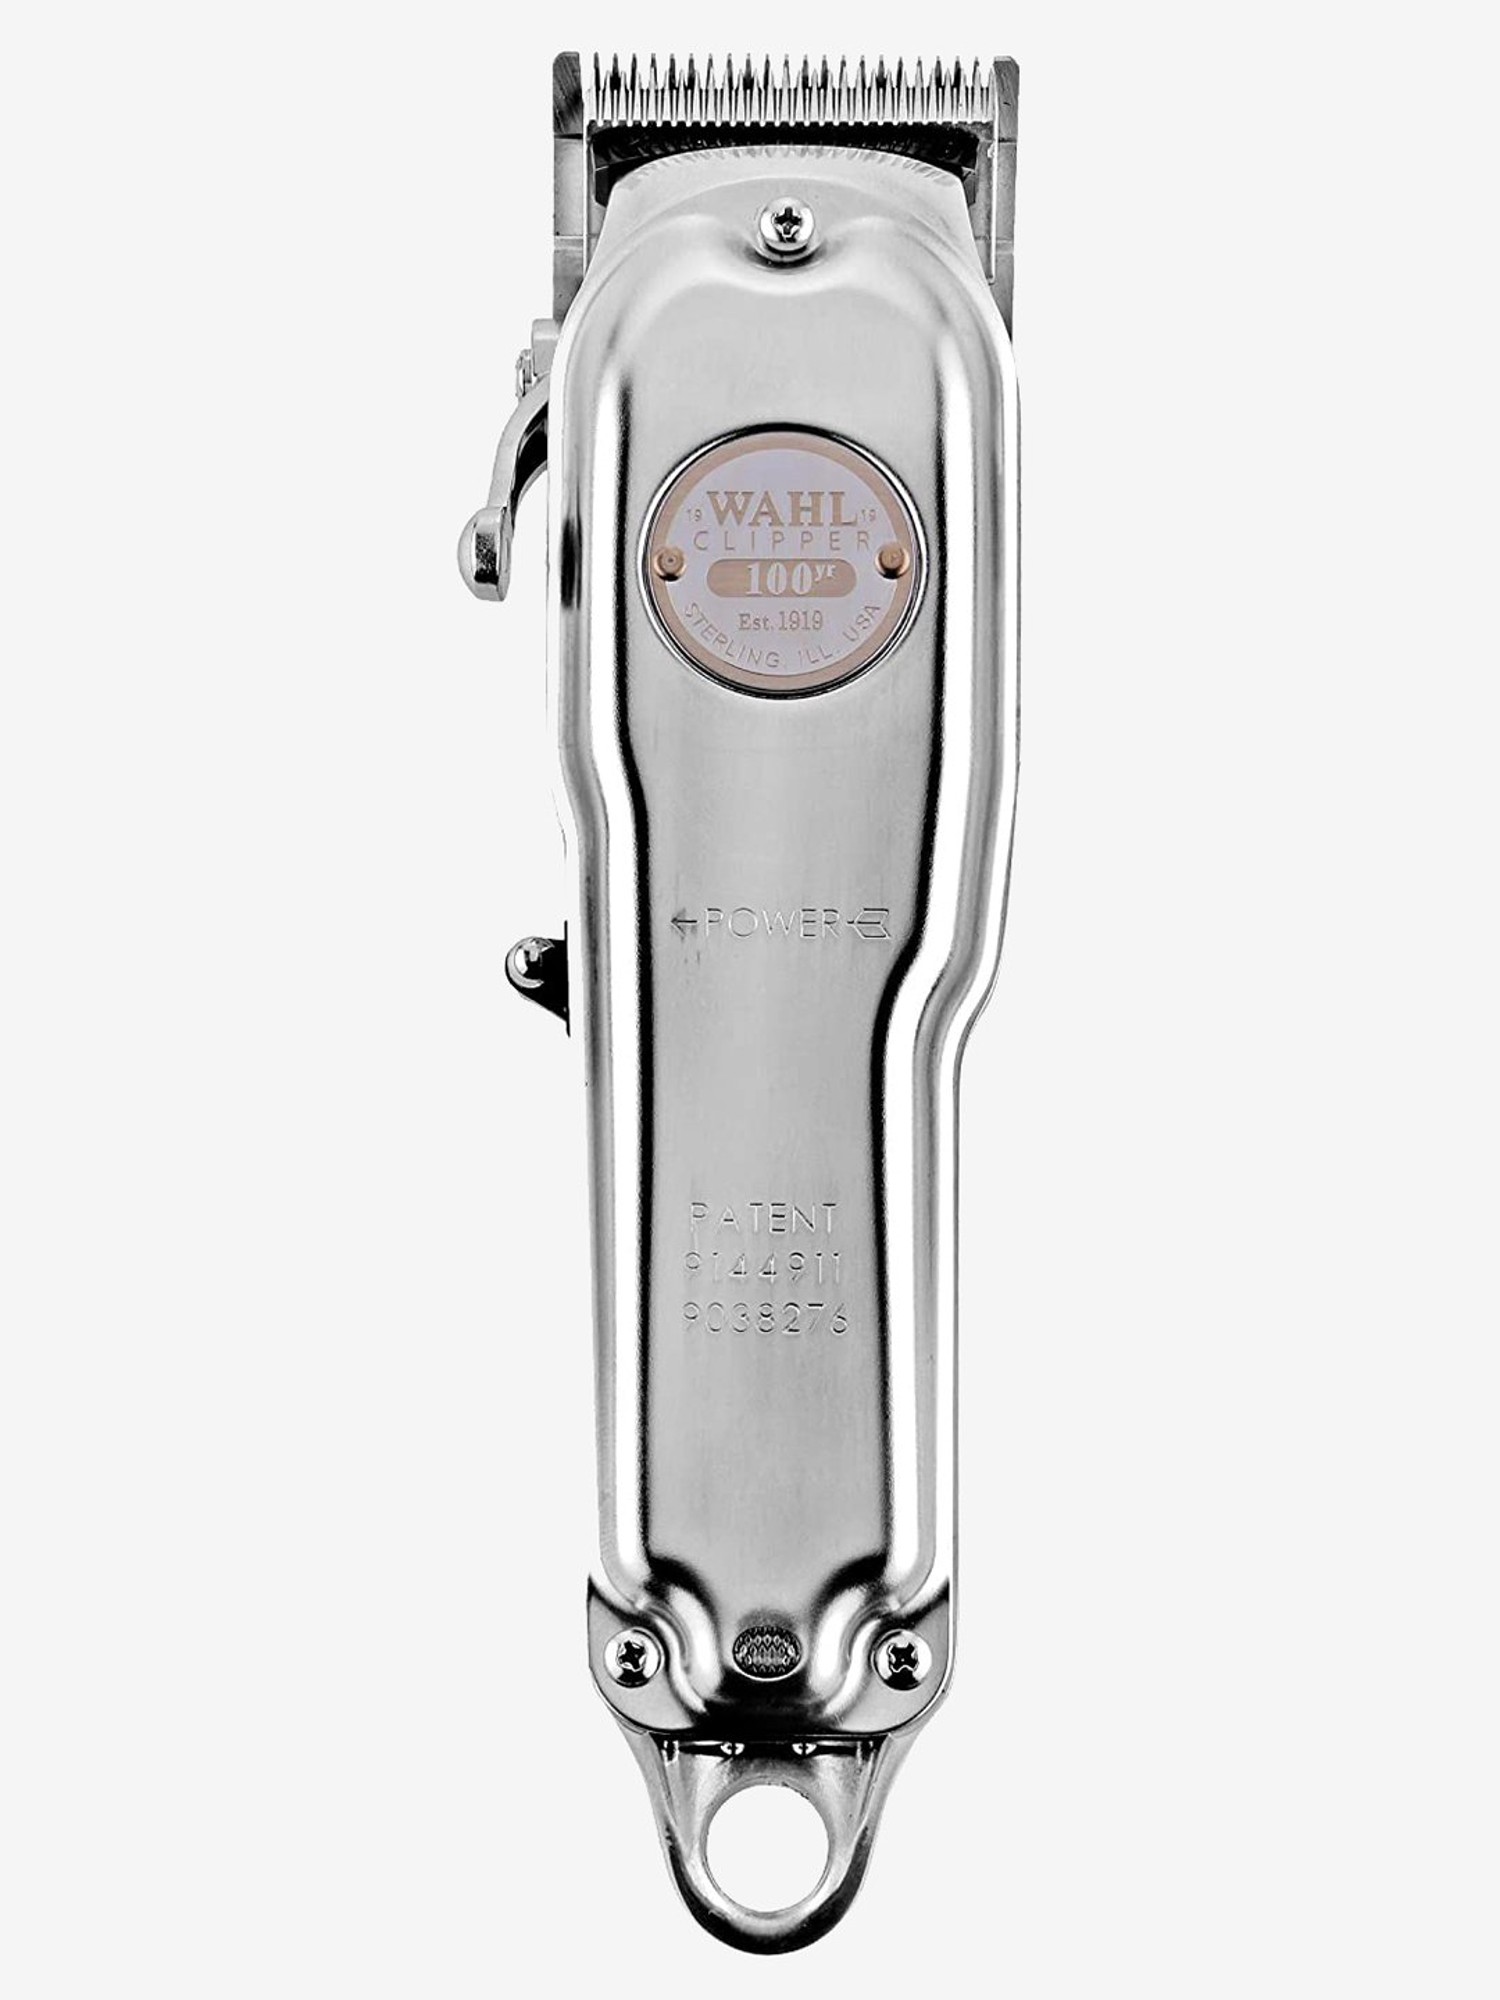 wahl 100 year anniversary cordless clipper